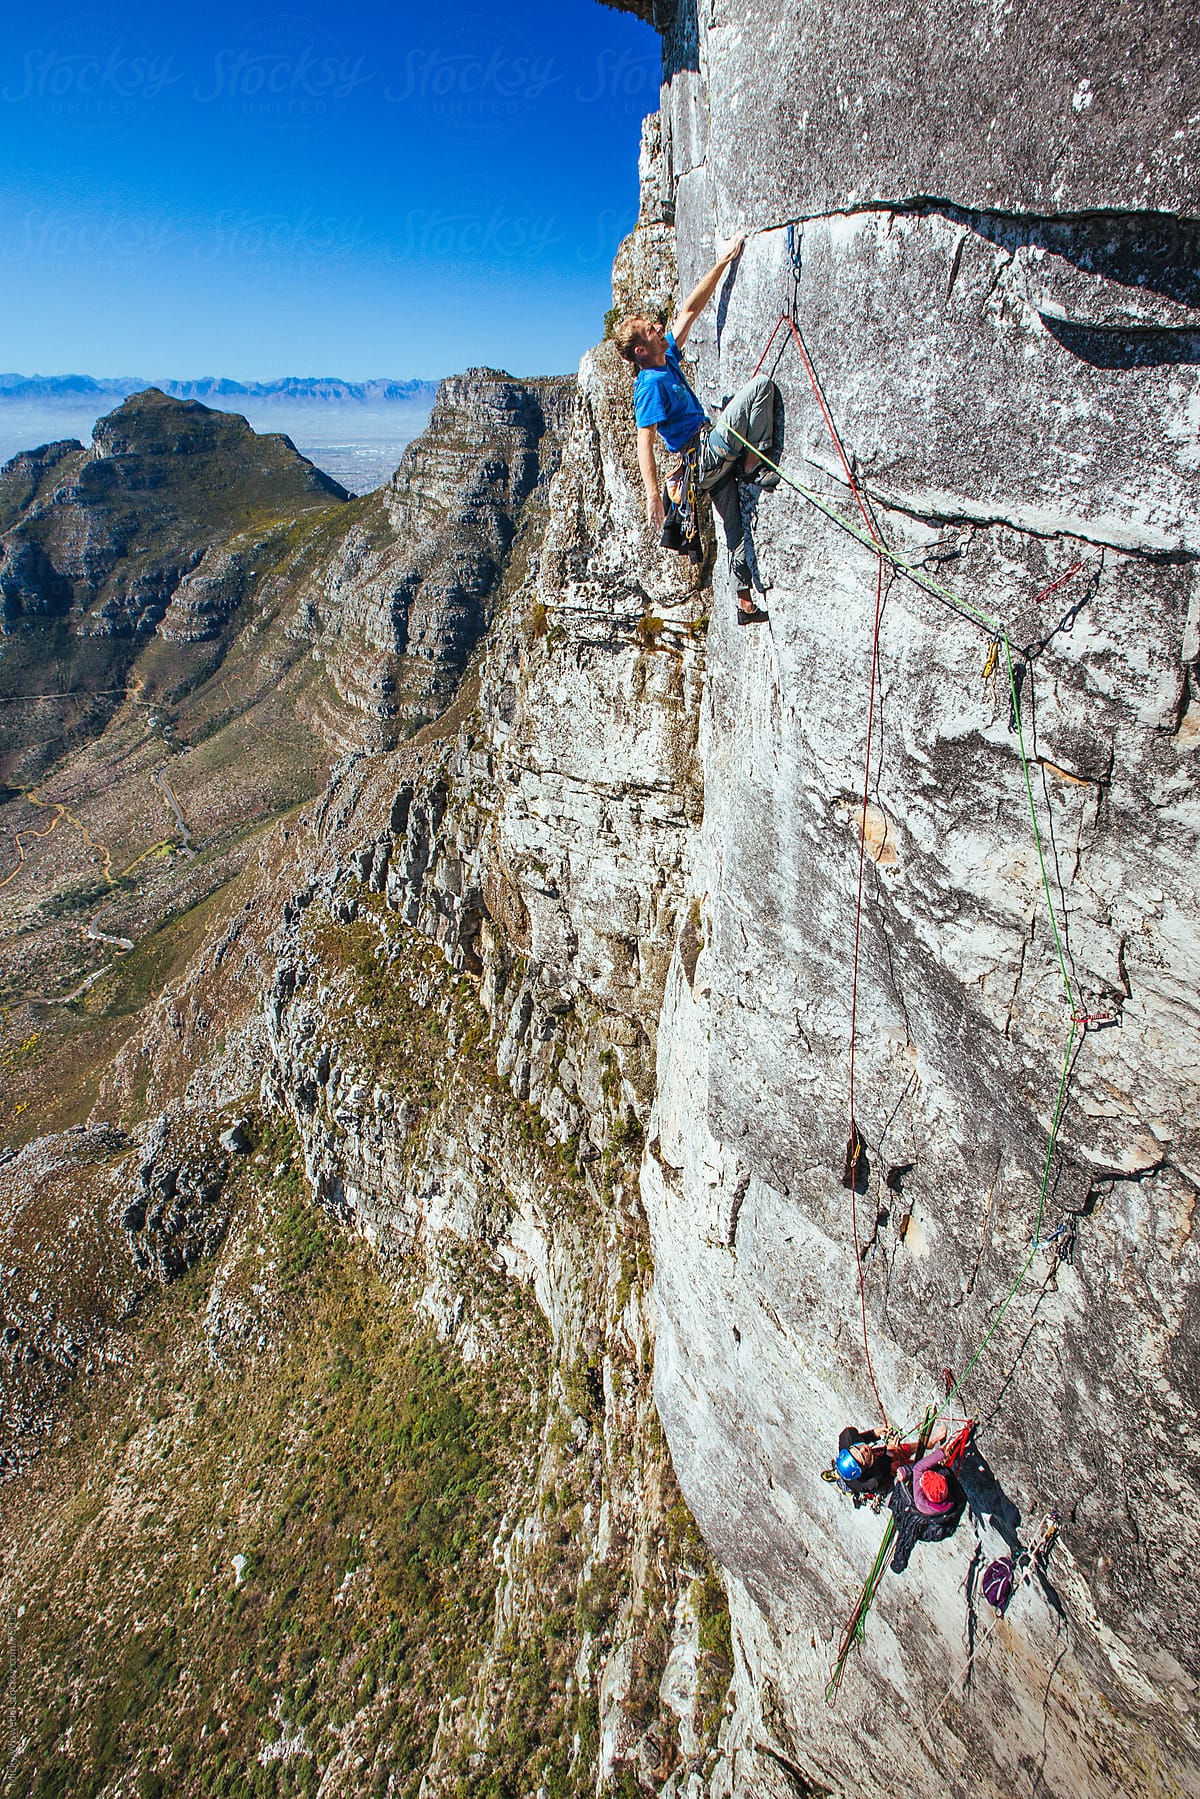 Rock climbers on a sheer cliff face